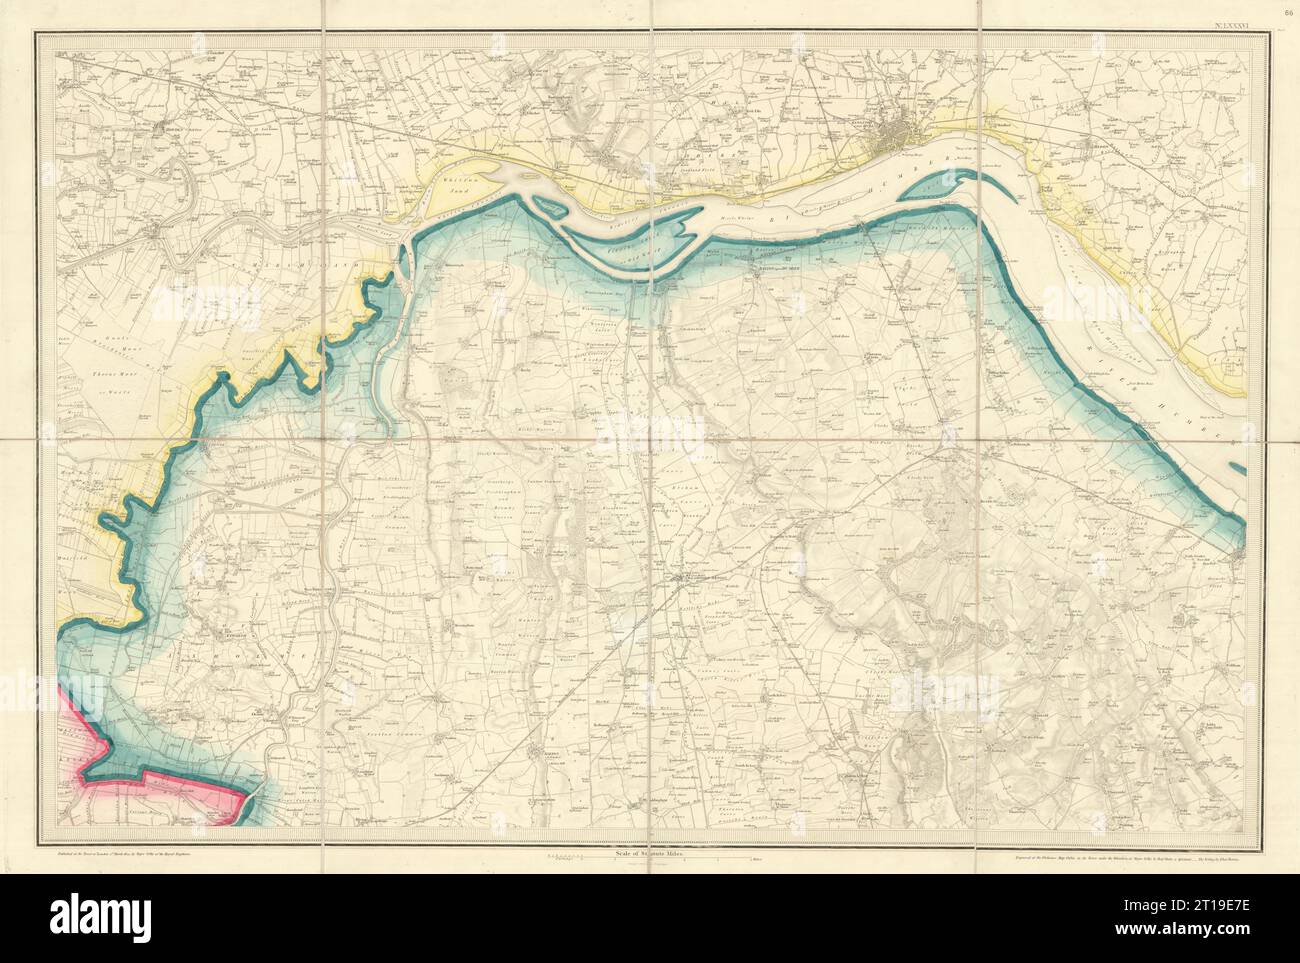 OS #86 Humber Estuary/Humberhead Levels, North Lincolnshire Wolds. Karte von Rumpf 1824 Stockfoto